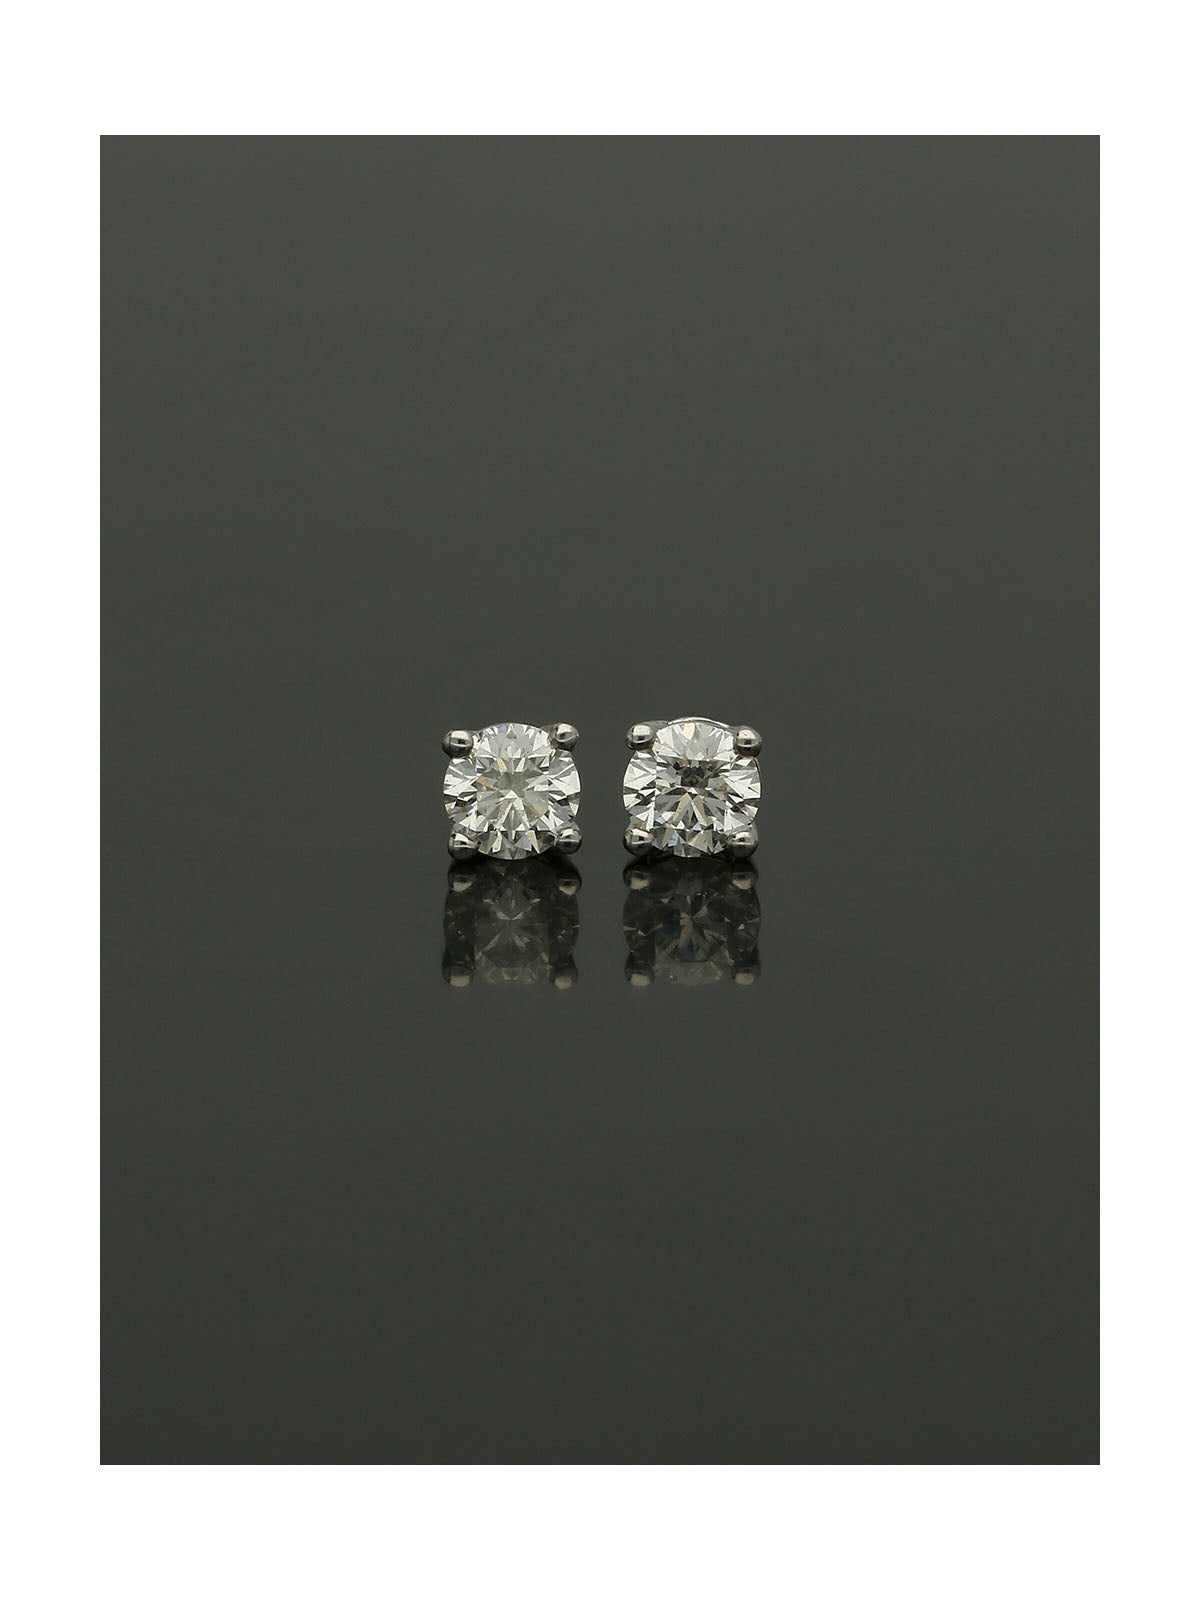 Diamond Round Brilliant 0.30ct Solitaire Stud Earrings in 9ct White Gold